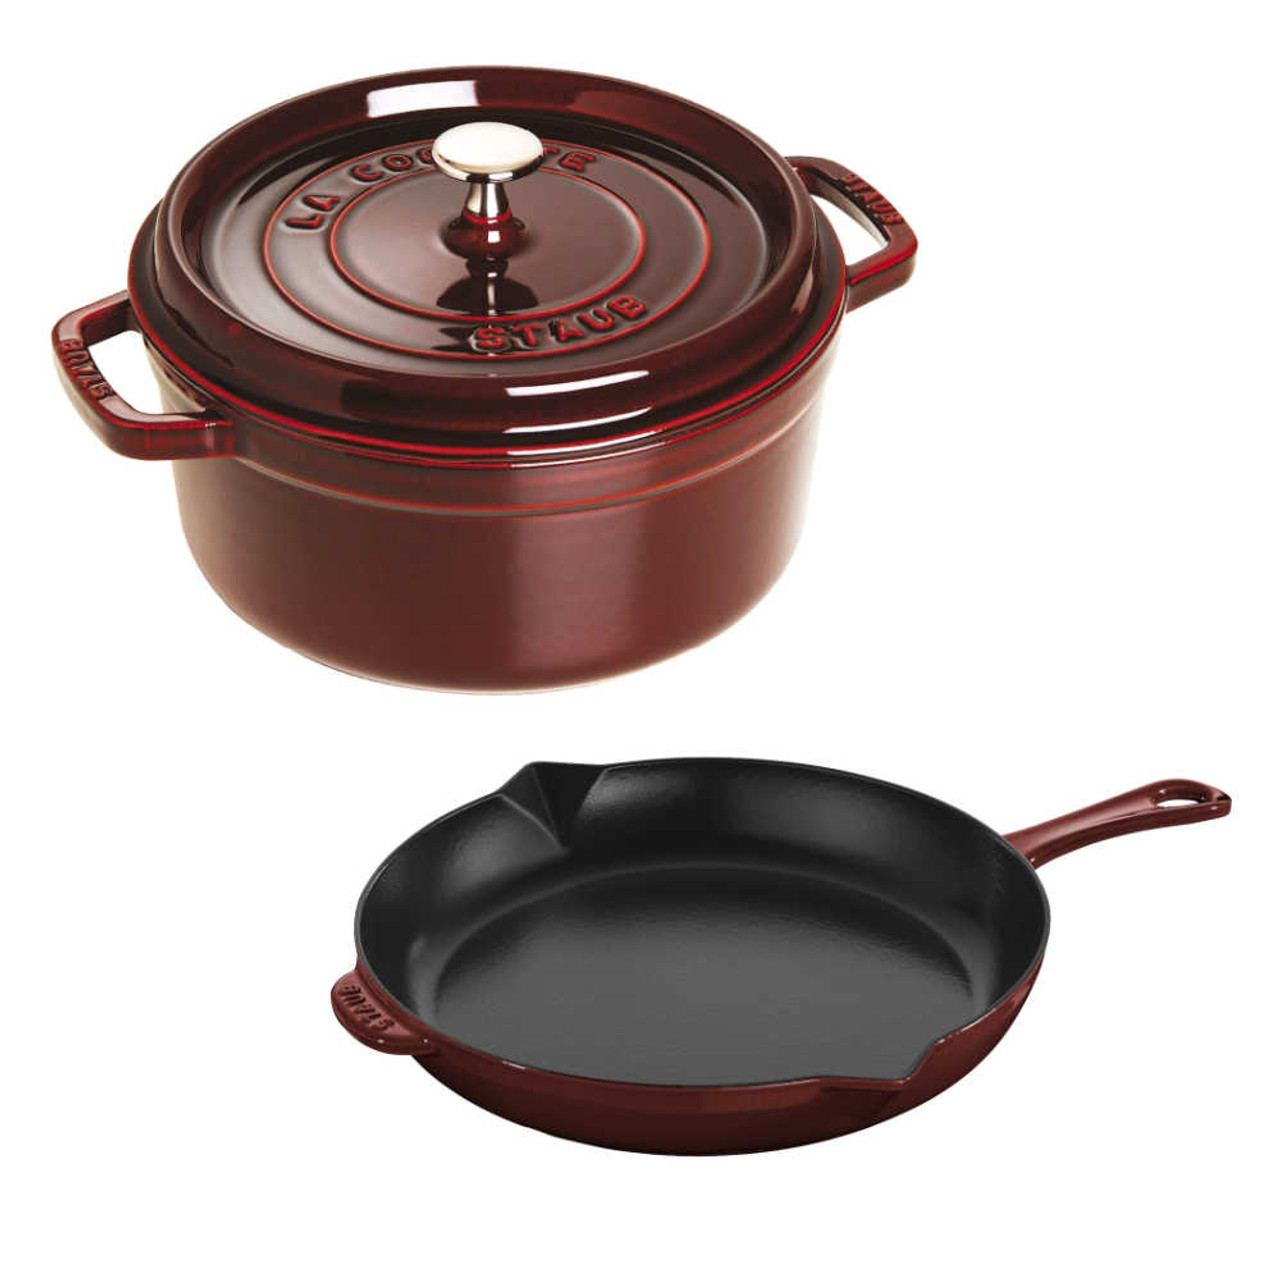 https://cdn11.bigcommerce.com/s-hccytny0od/images/stencil/1280x1280/products/5789/25705/Staub_Cast_Iron_Cocotte_and_Fry_Pan_Set_Grenadine__13385.1696526589.jpg?c=2?imbypass=on